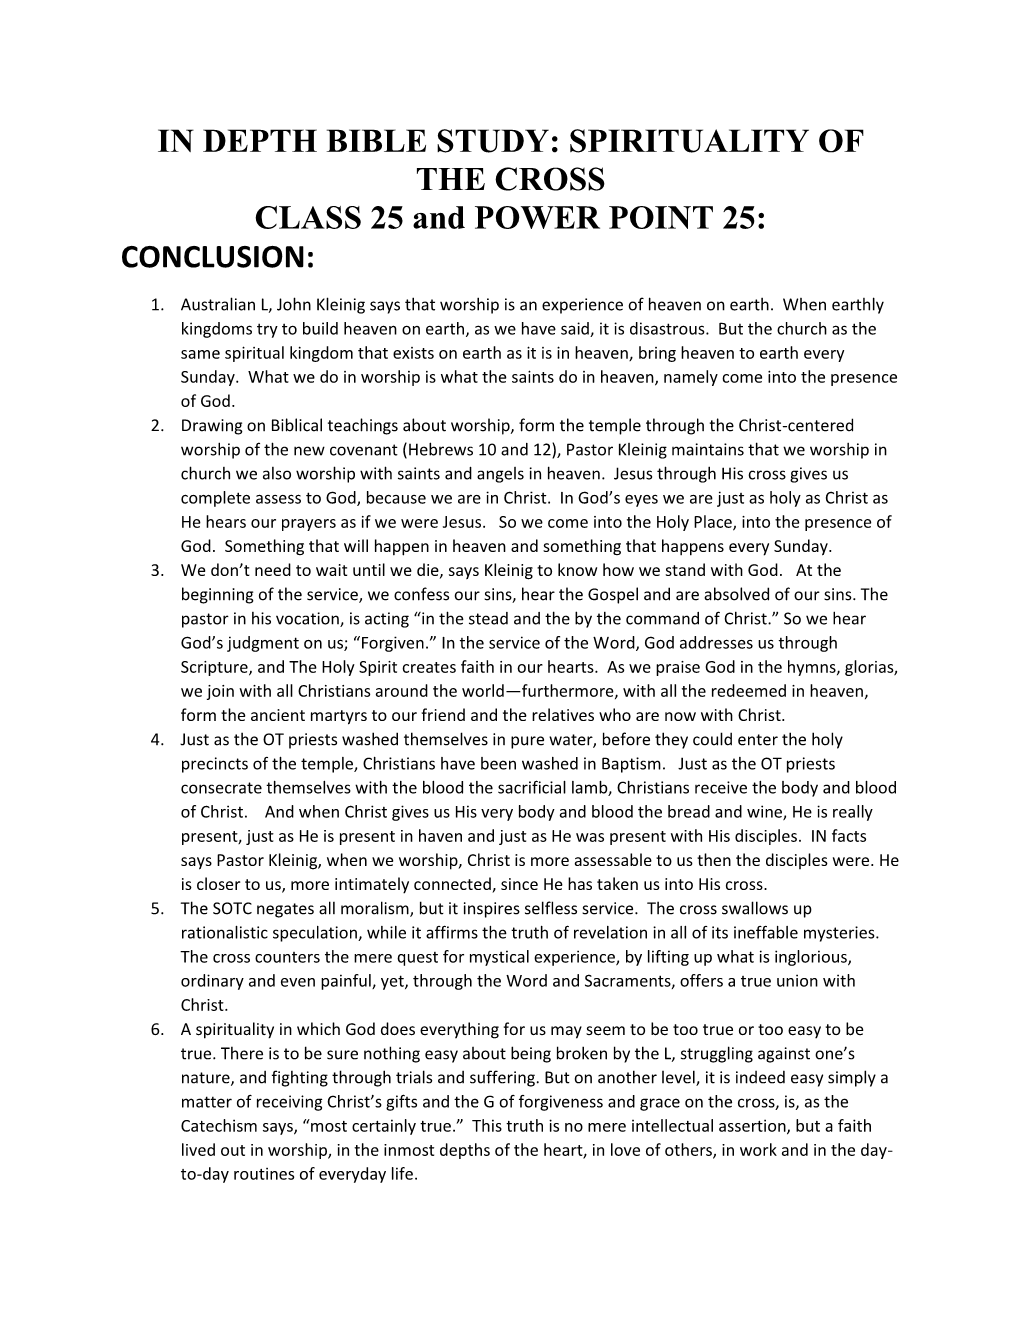 IN DEPTH BIBLE STUDY: SPIRITUALITY of the CROSS CLASS 25 and POWER POINT 25: CONCLUSION